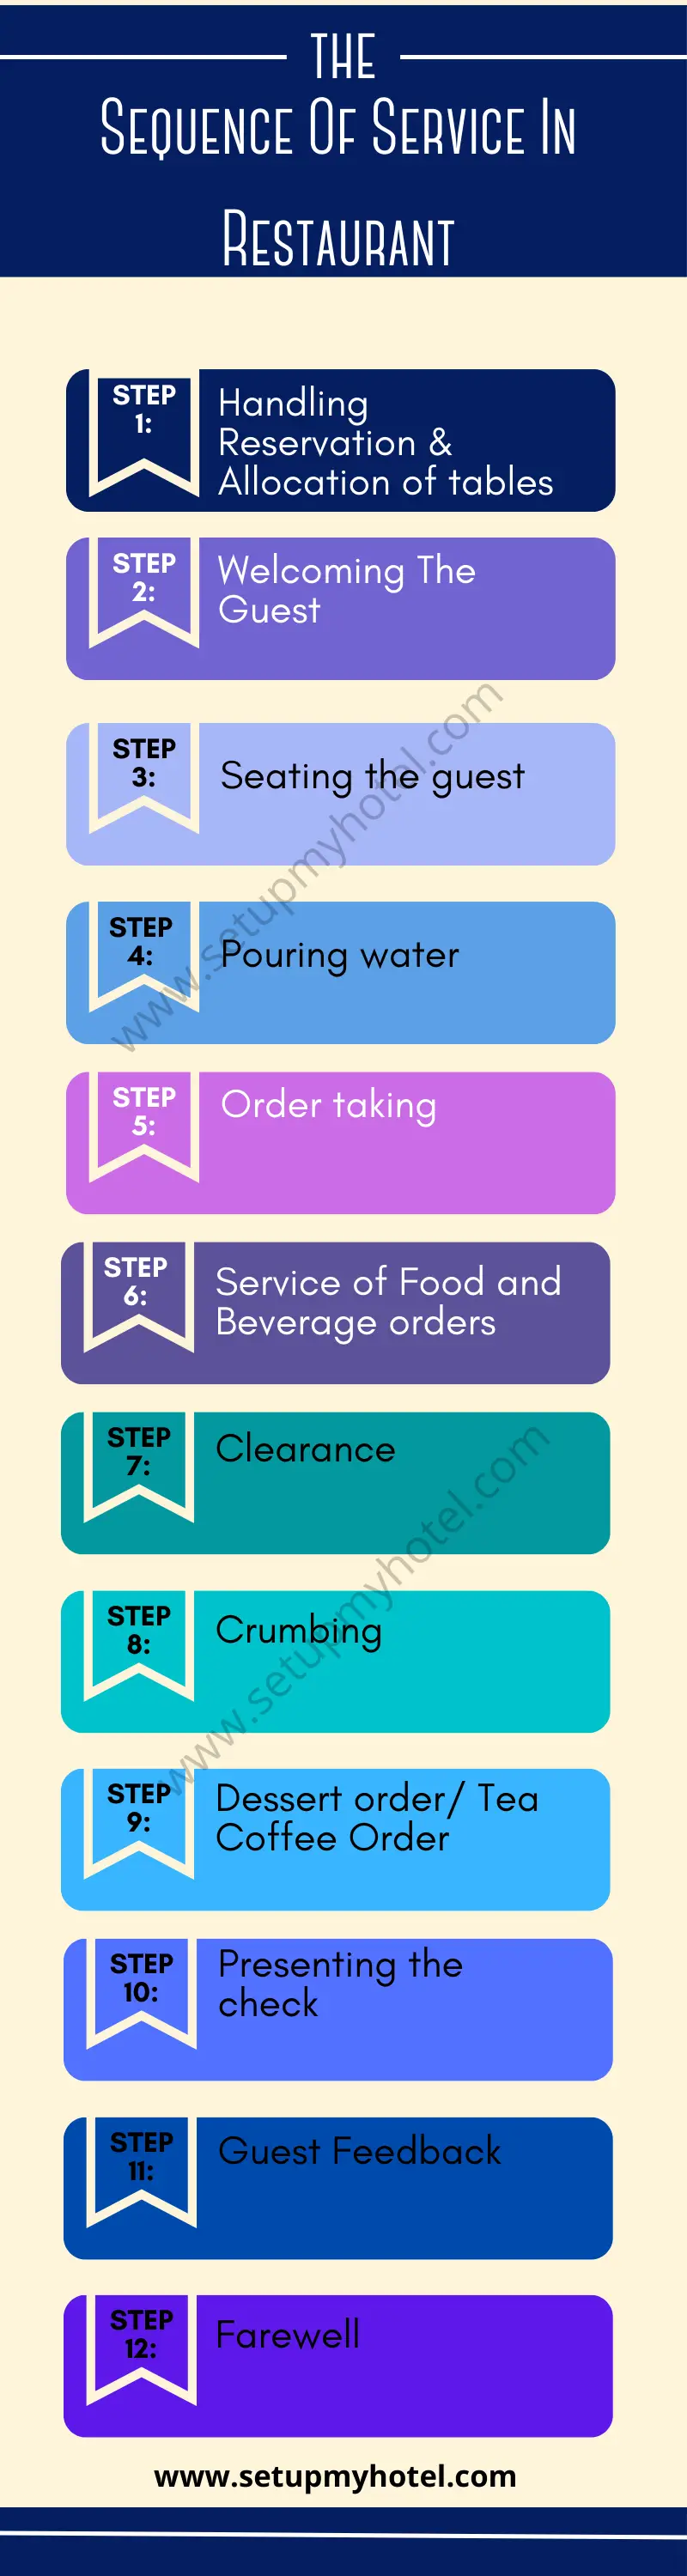 The Sequence Of Service In Restaurant